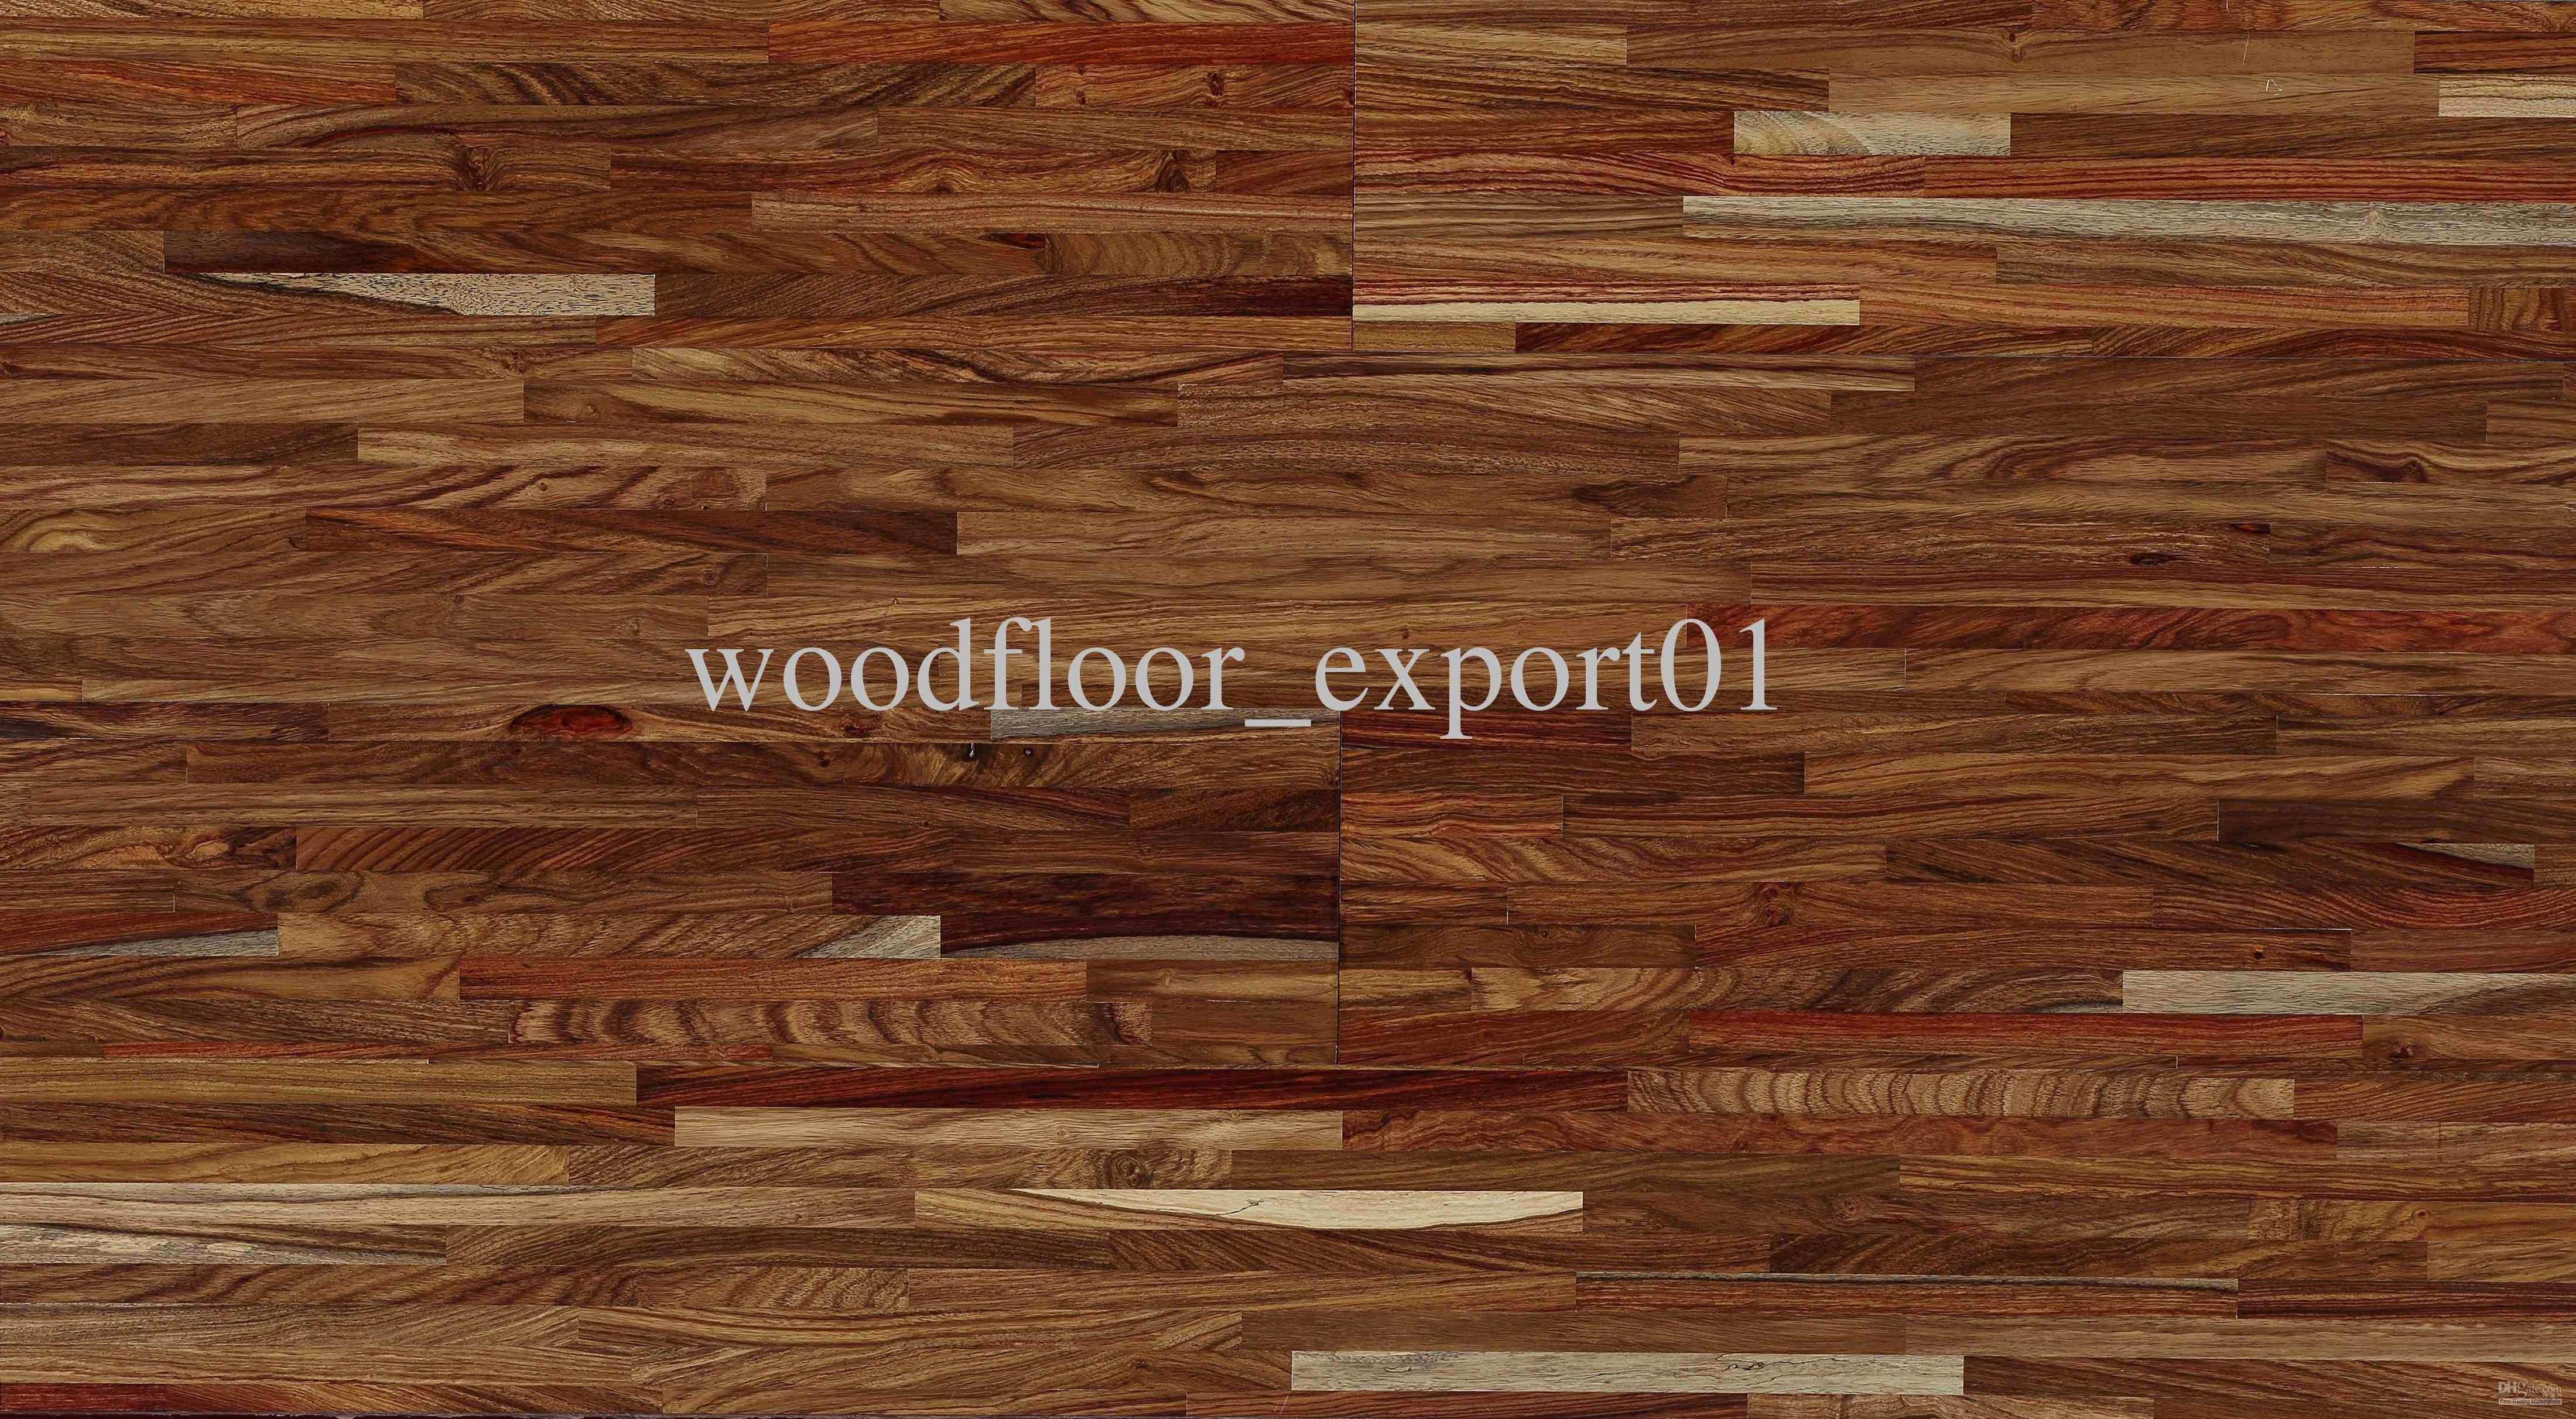 Hardwood Flooring On Stairs Pictures Of 15 Unique Types Of Hardwood Flooring Image Dizpos Com In Types Of Hardwood Flooring Awesome 50 Inspirational Sanding and Refinishing Hardwood Floors Graphics Image Of 15